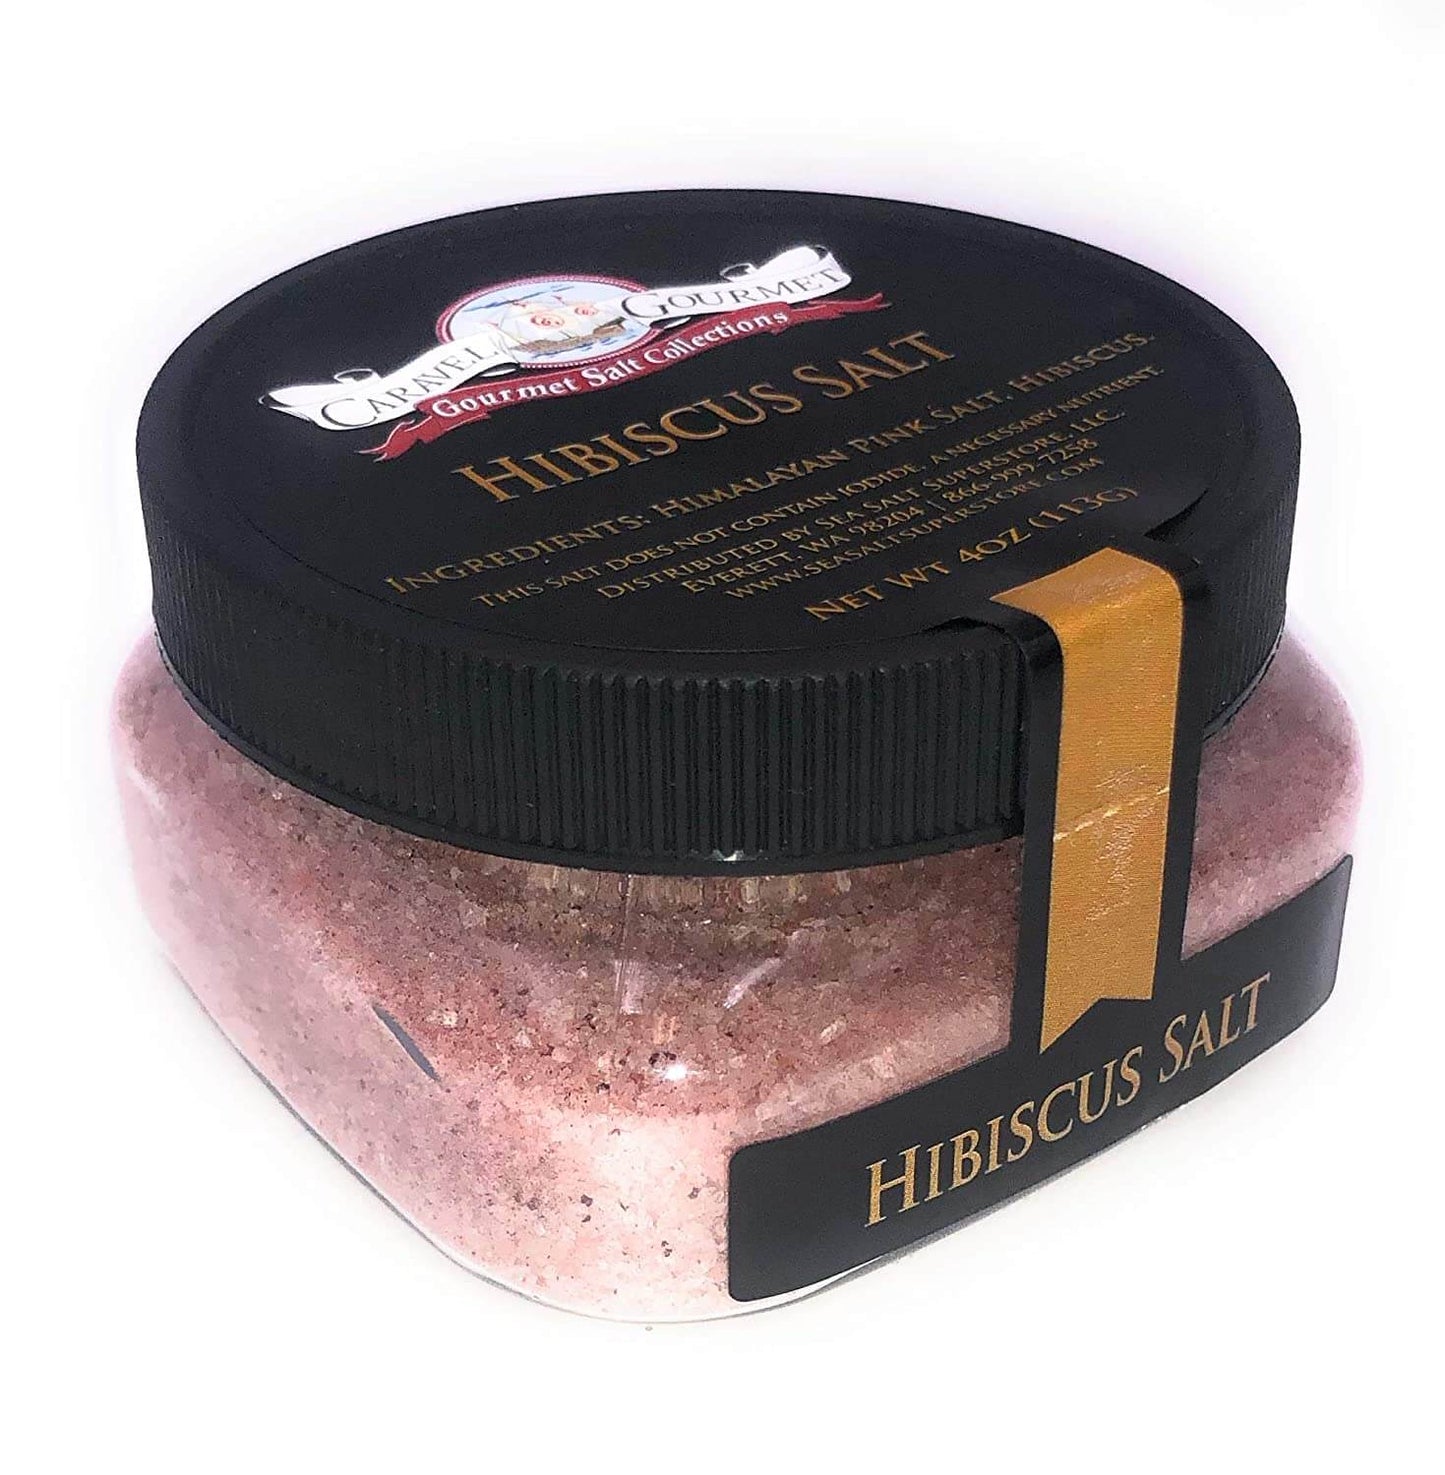 Hibiscus Sea Salt - 4 oz - Stackable Containers - Caravel Gourmet - Case of 6